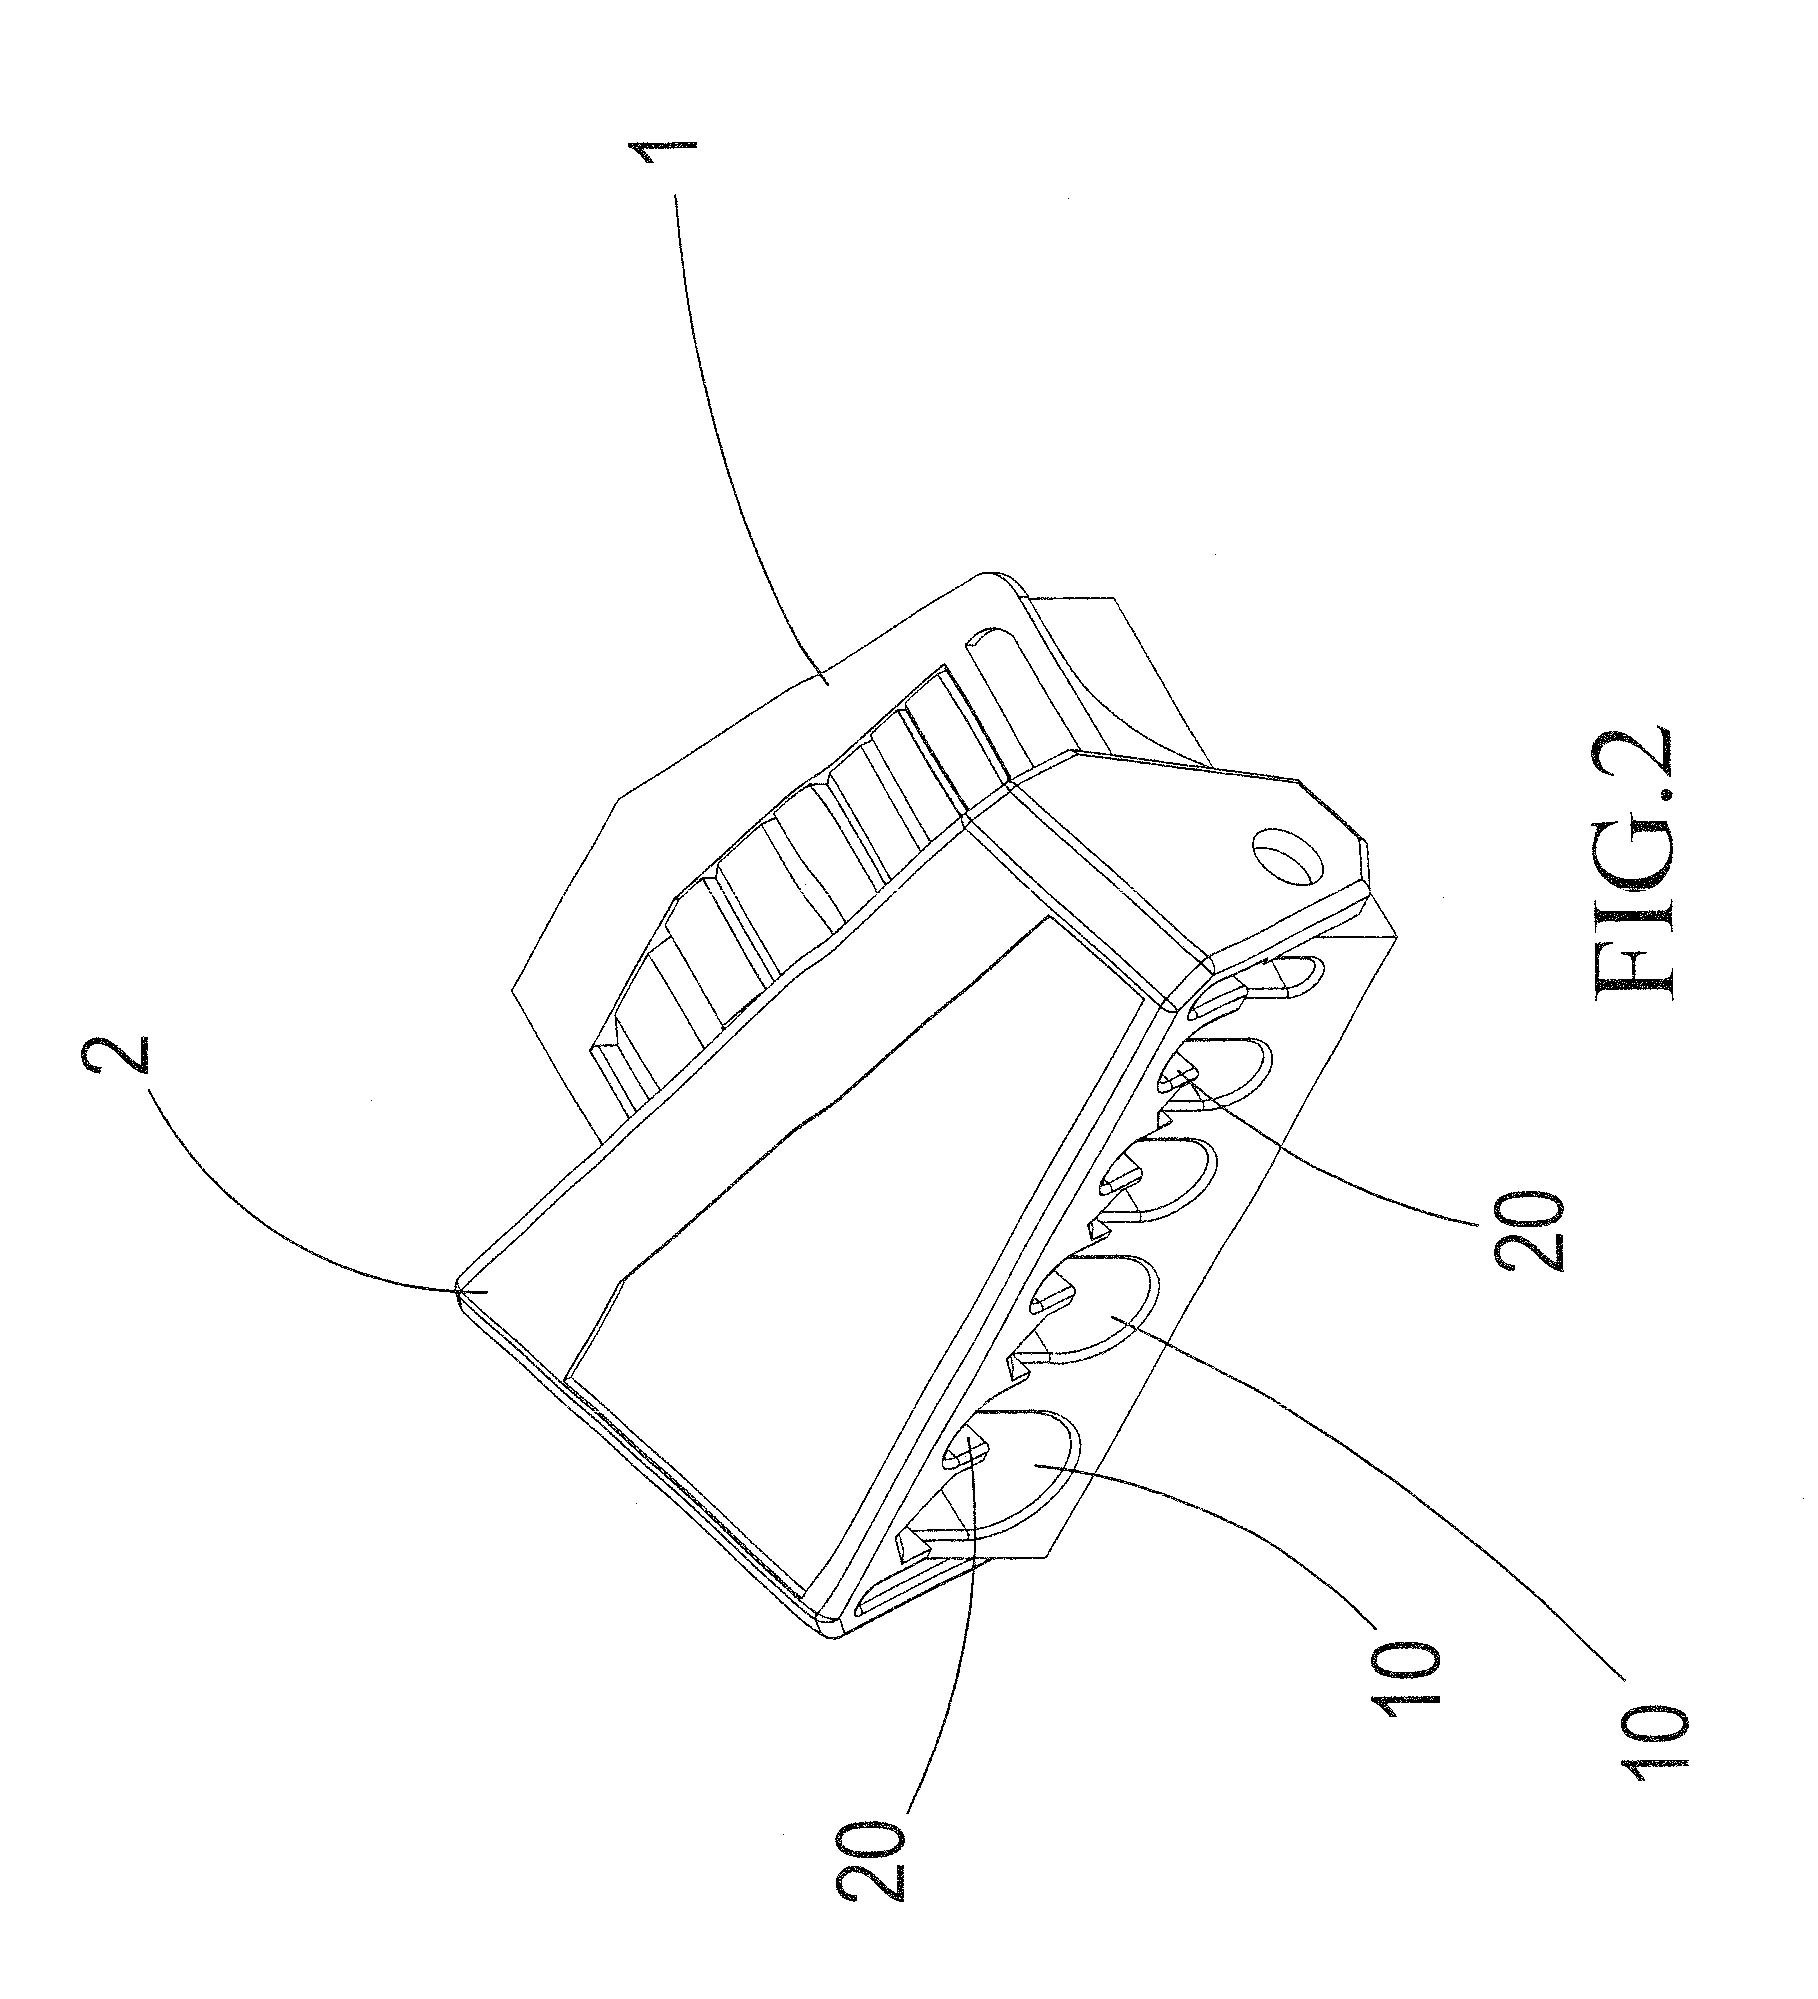 Structure of tool holding sheath